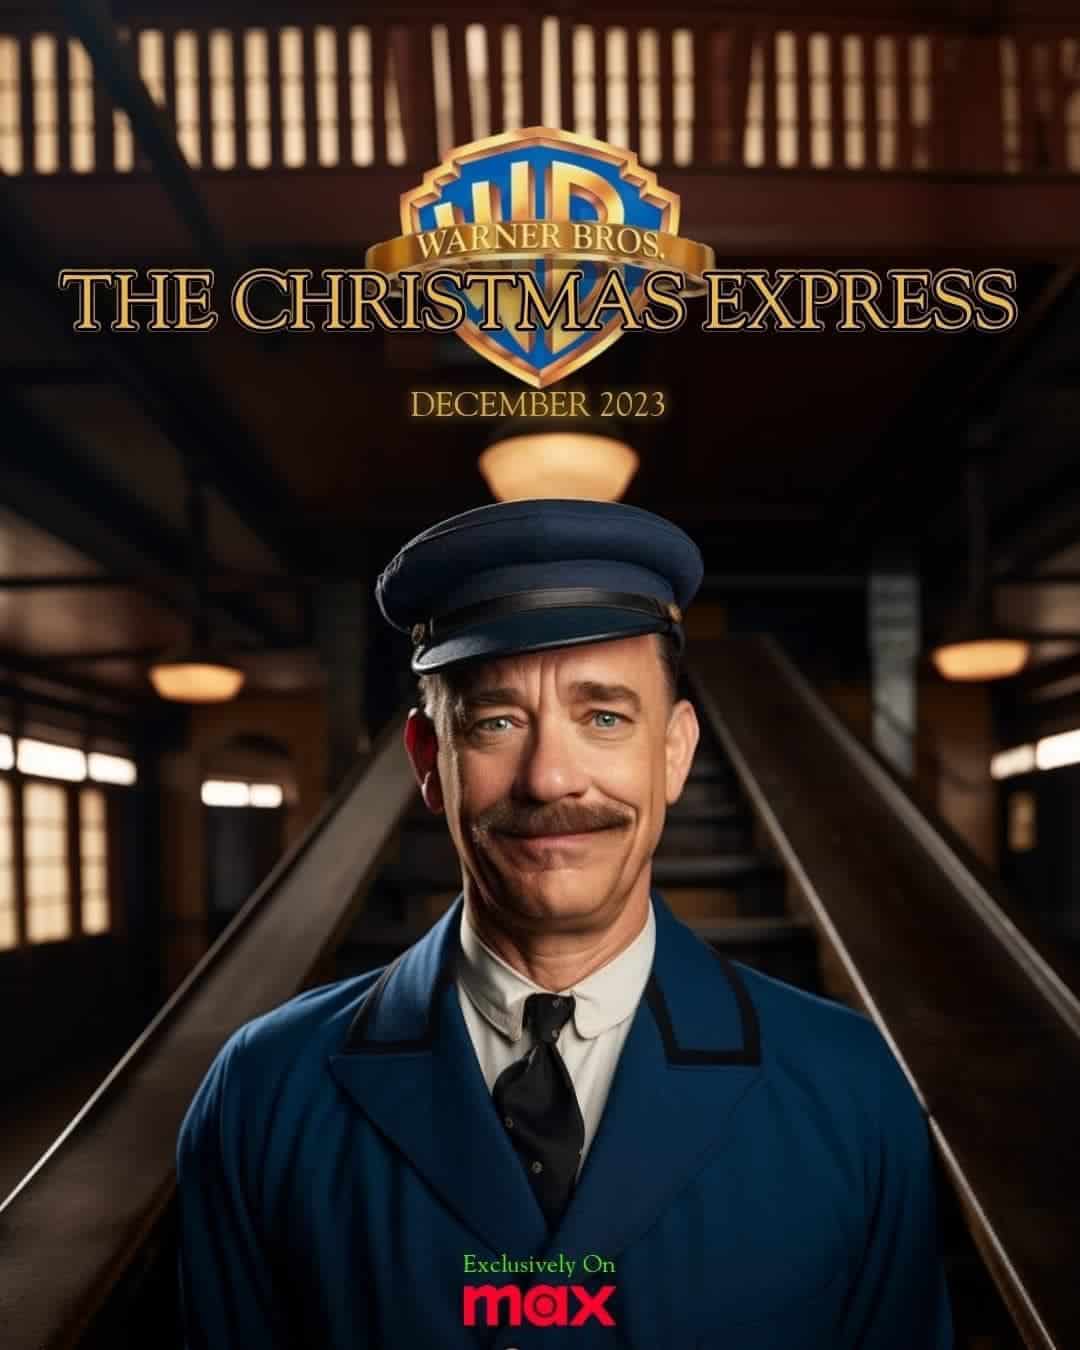 All Aboard the Hype Train The Christmas Express A Polar Express